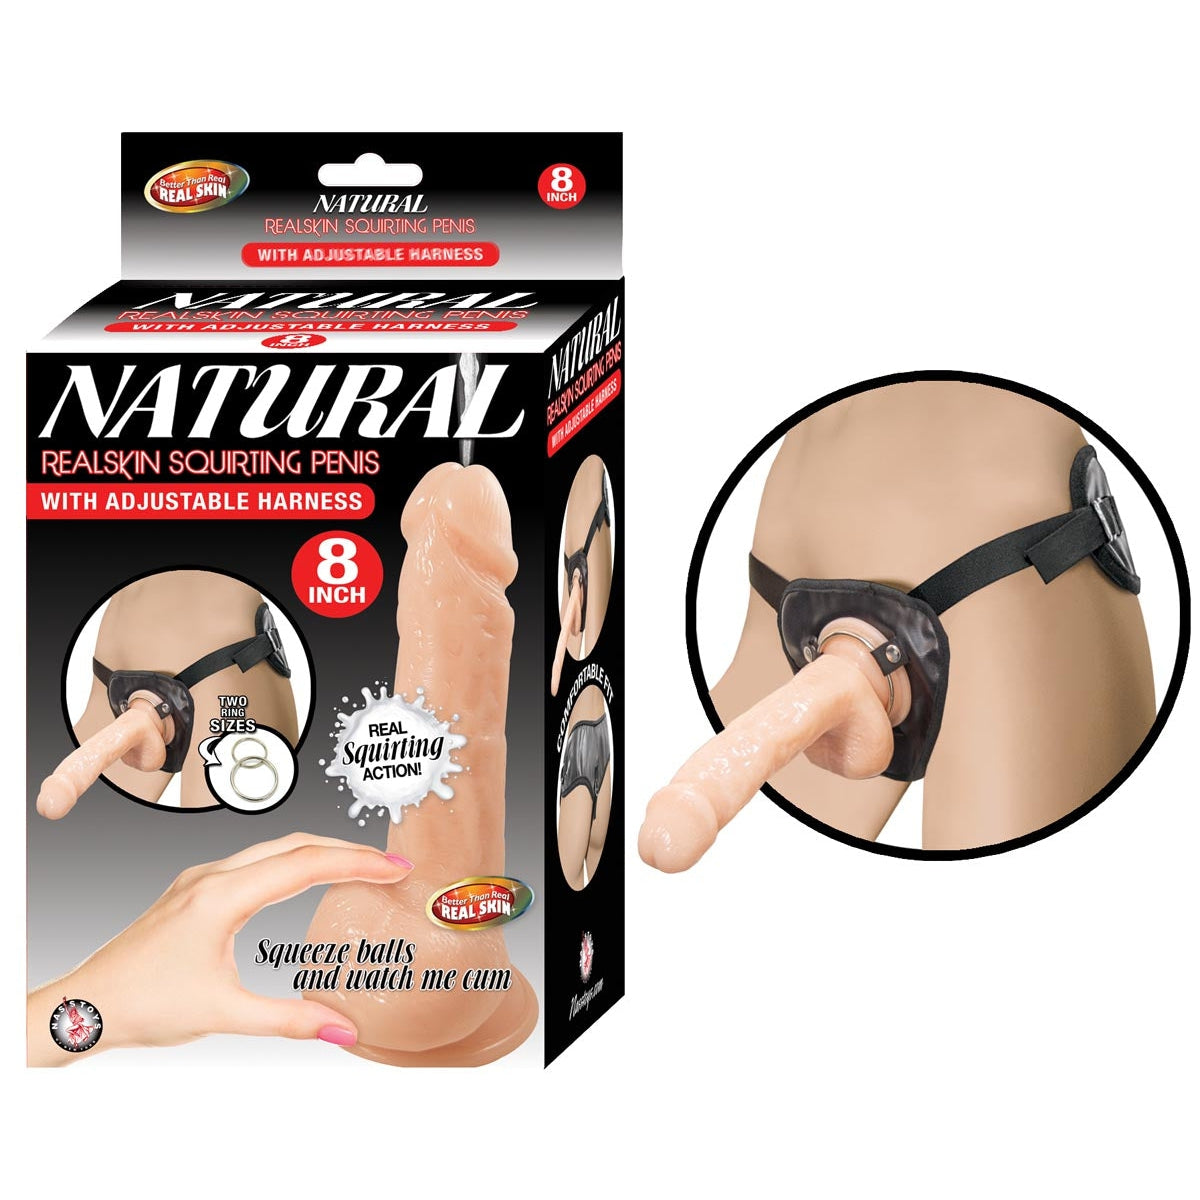 Natural Realskin 8 Inch Squirting Penis with Adjustable Harness